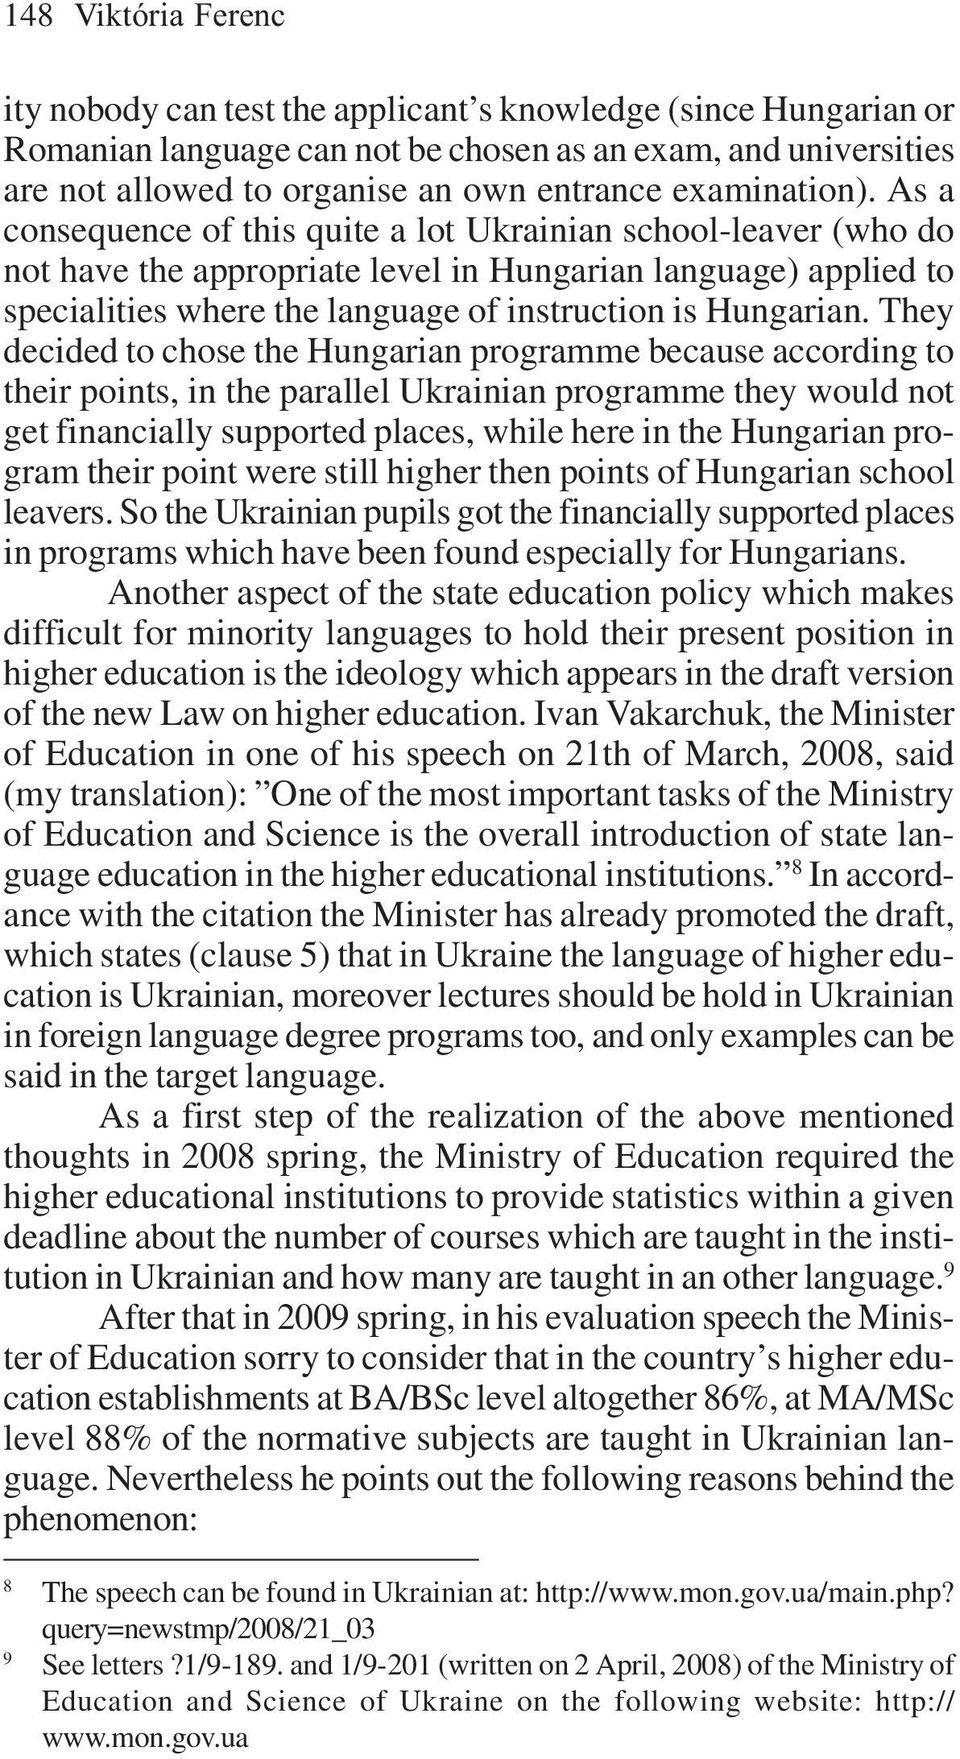 As a consequence of this quite a lot Ukrainian school-leaver (who do not have the appropriate level in Hungarian language) applied to specialities where the language of instruction is Hungarian.